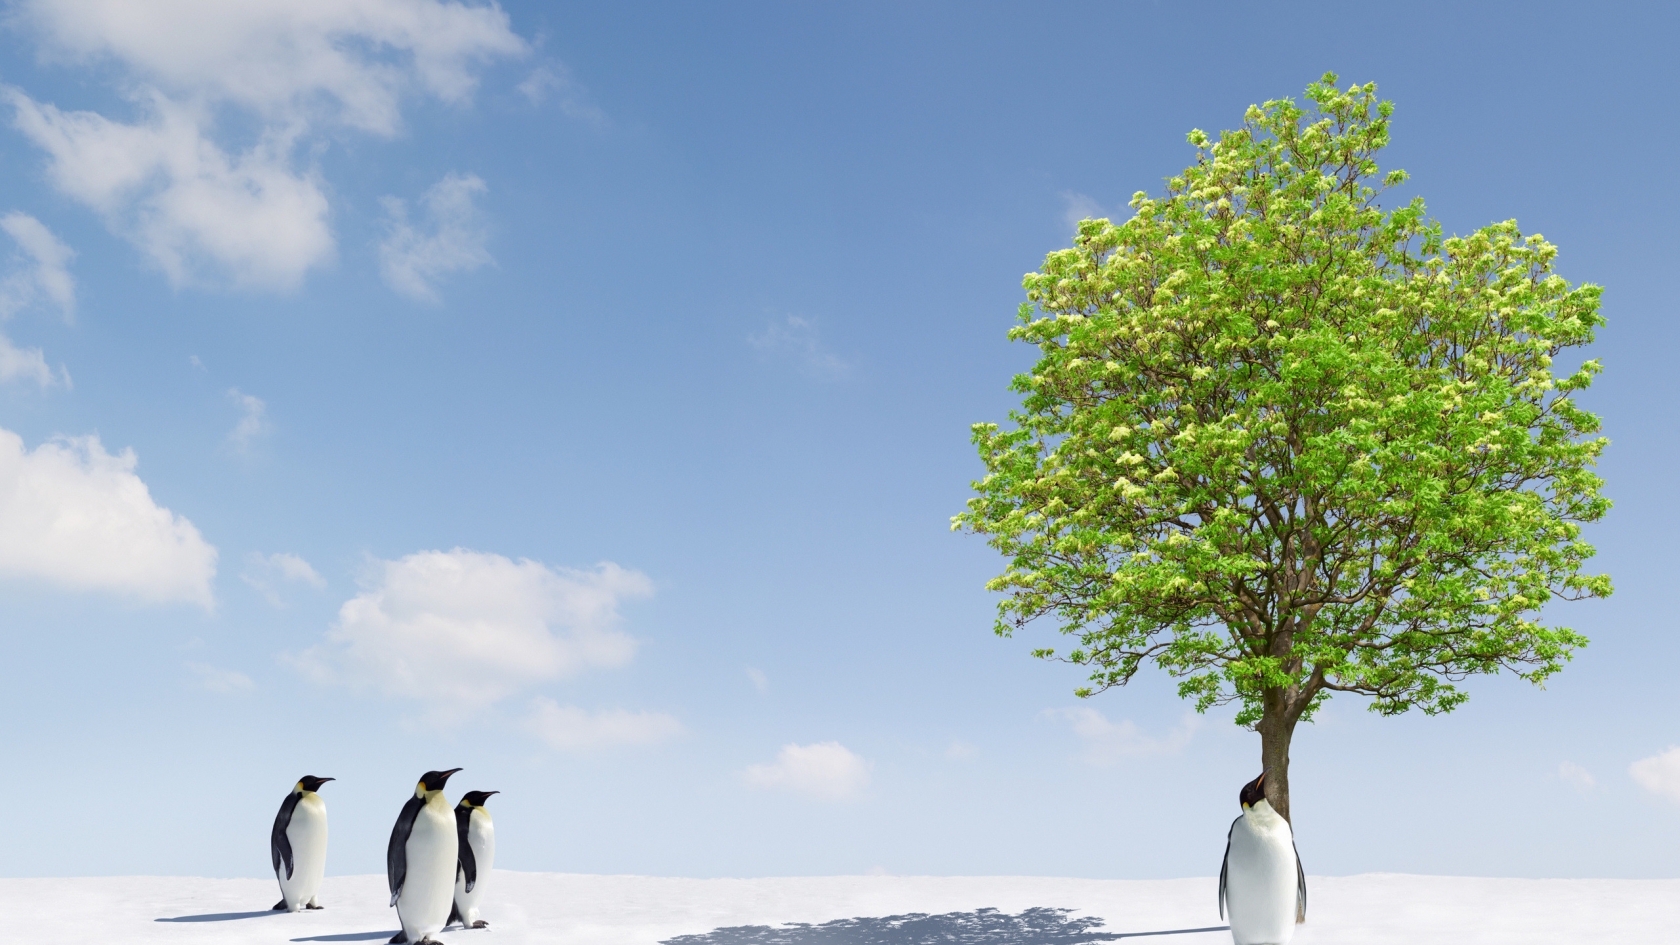 Penguins and Green Tree for 1680 x 945 HDTV resolution